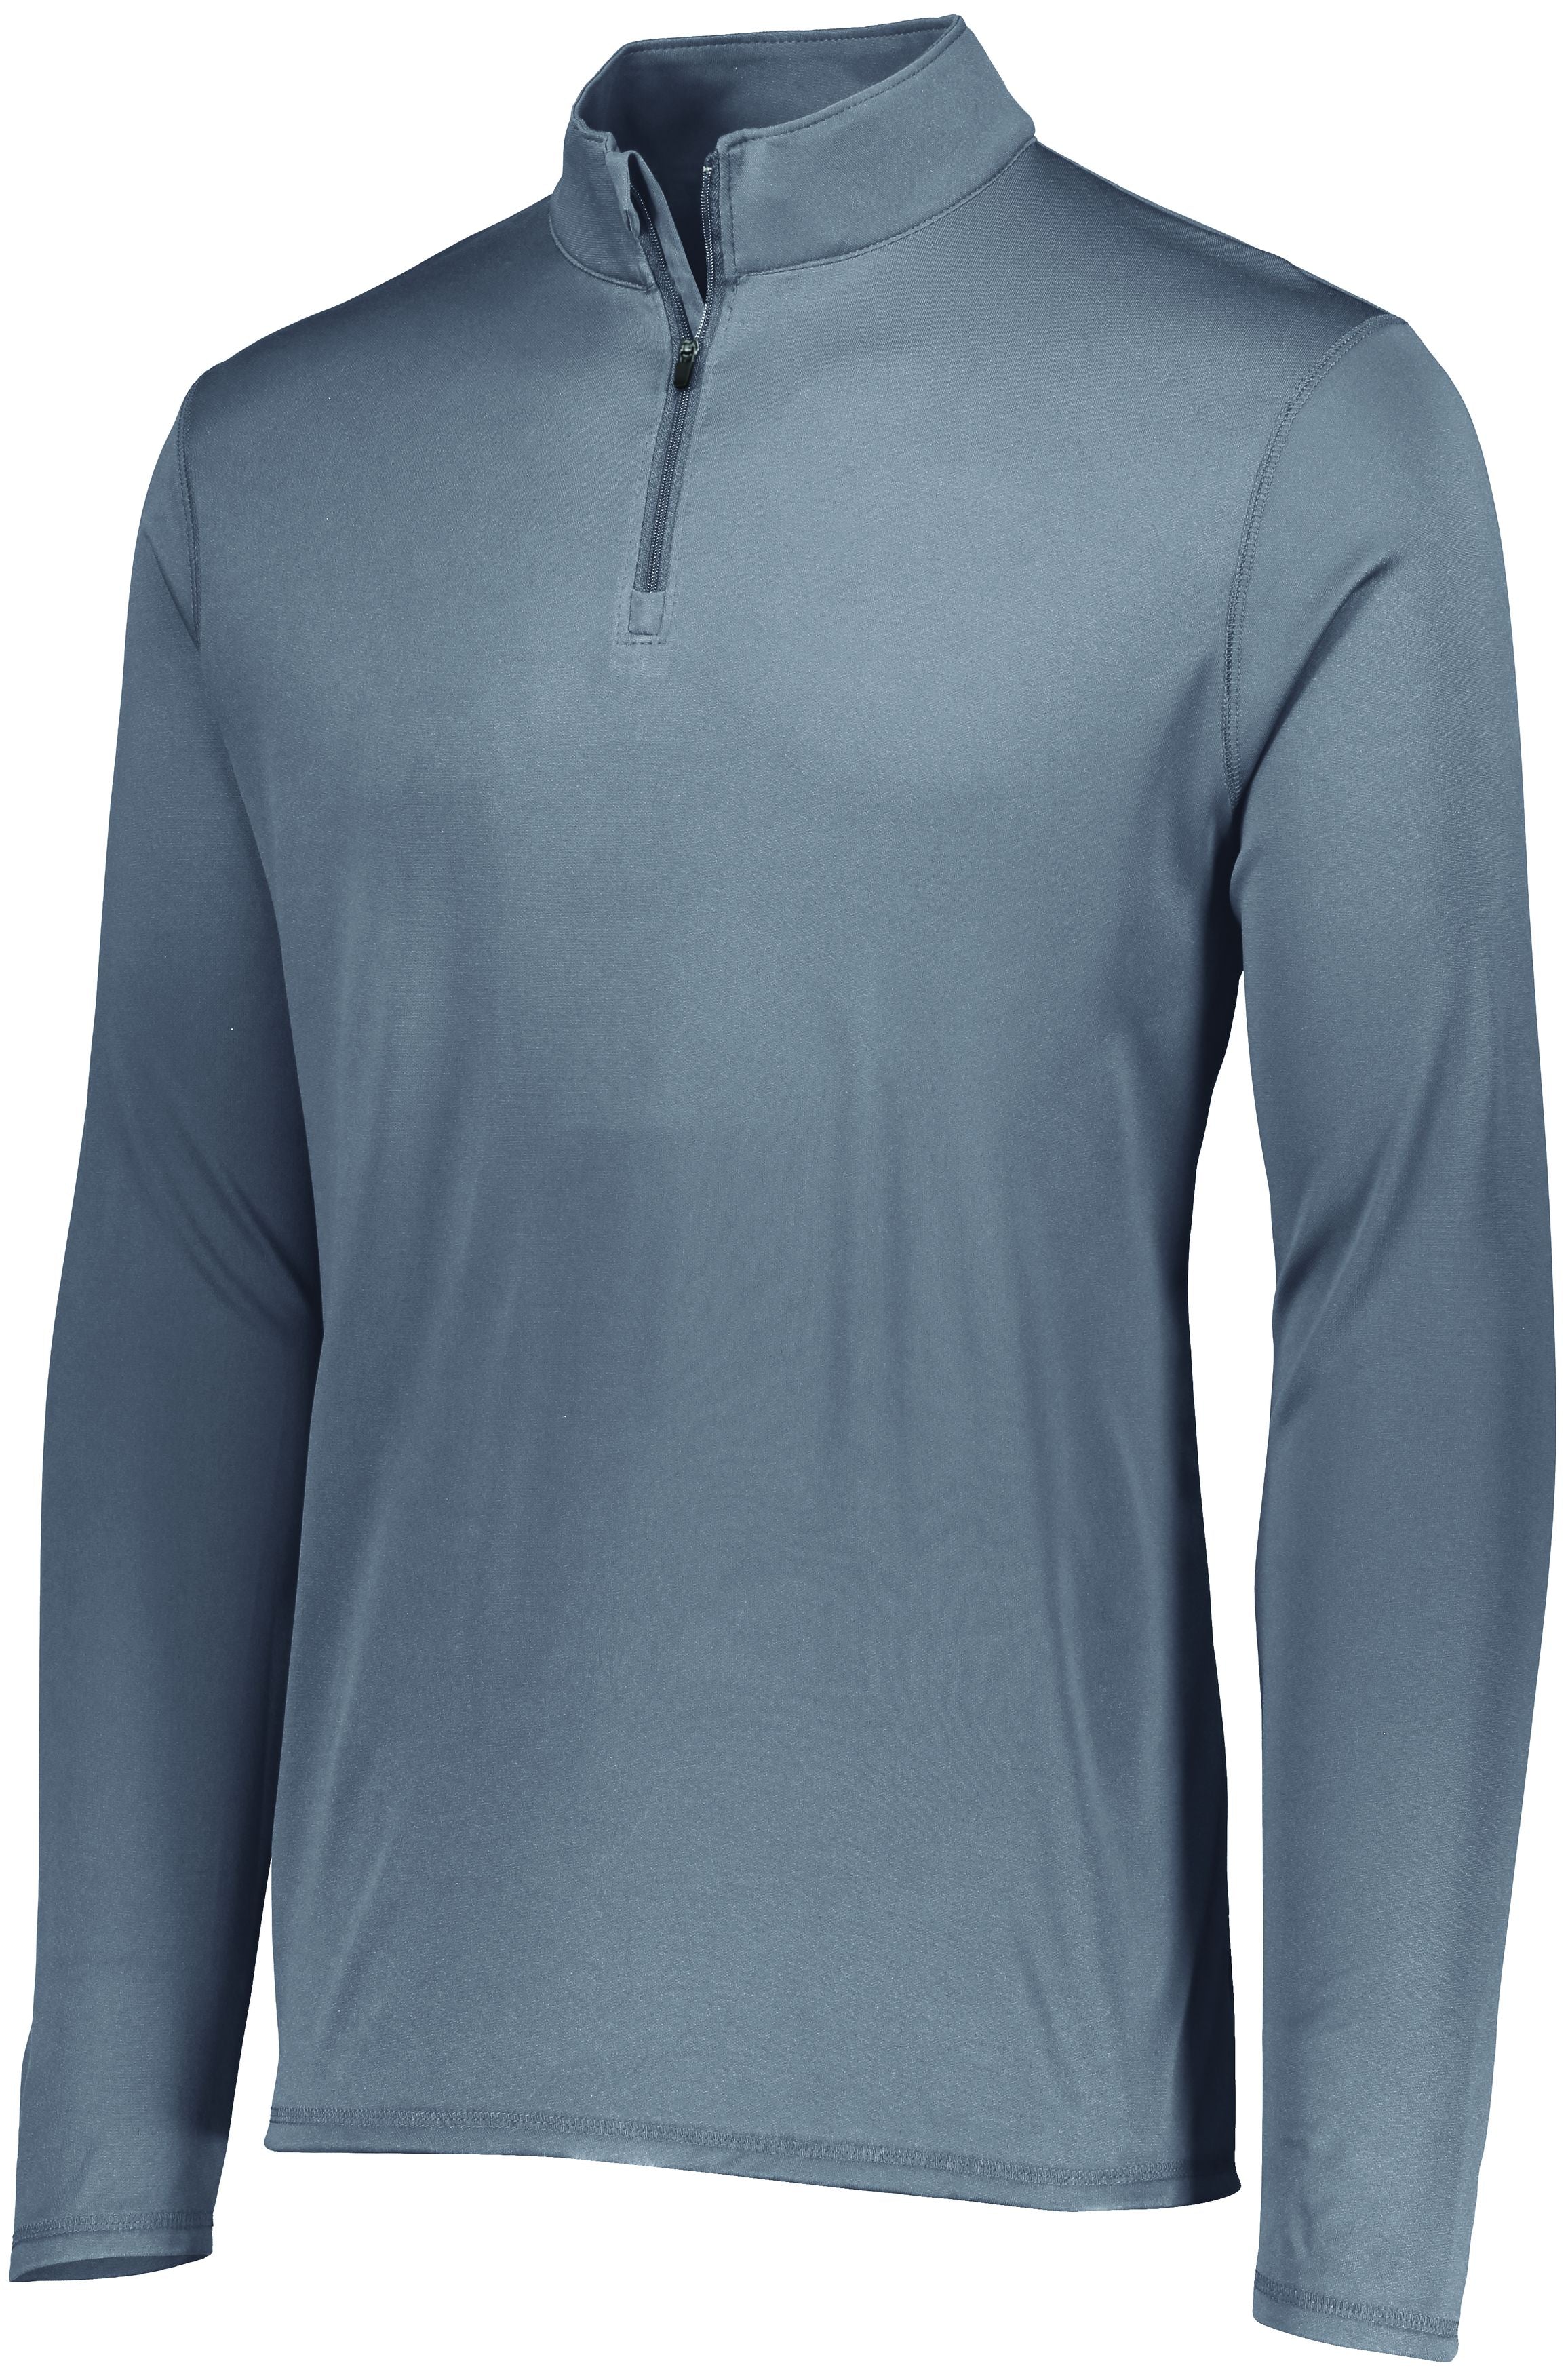 Augusta Sportswear Attain Wicking 1/4 Zip Pullover in Graphite  -Part of the Adult, Adult-Pullover, Augusta-Products, Outerwear product lines at KanaleyCreations.com